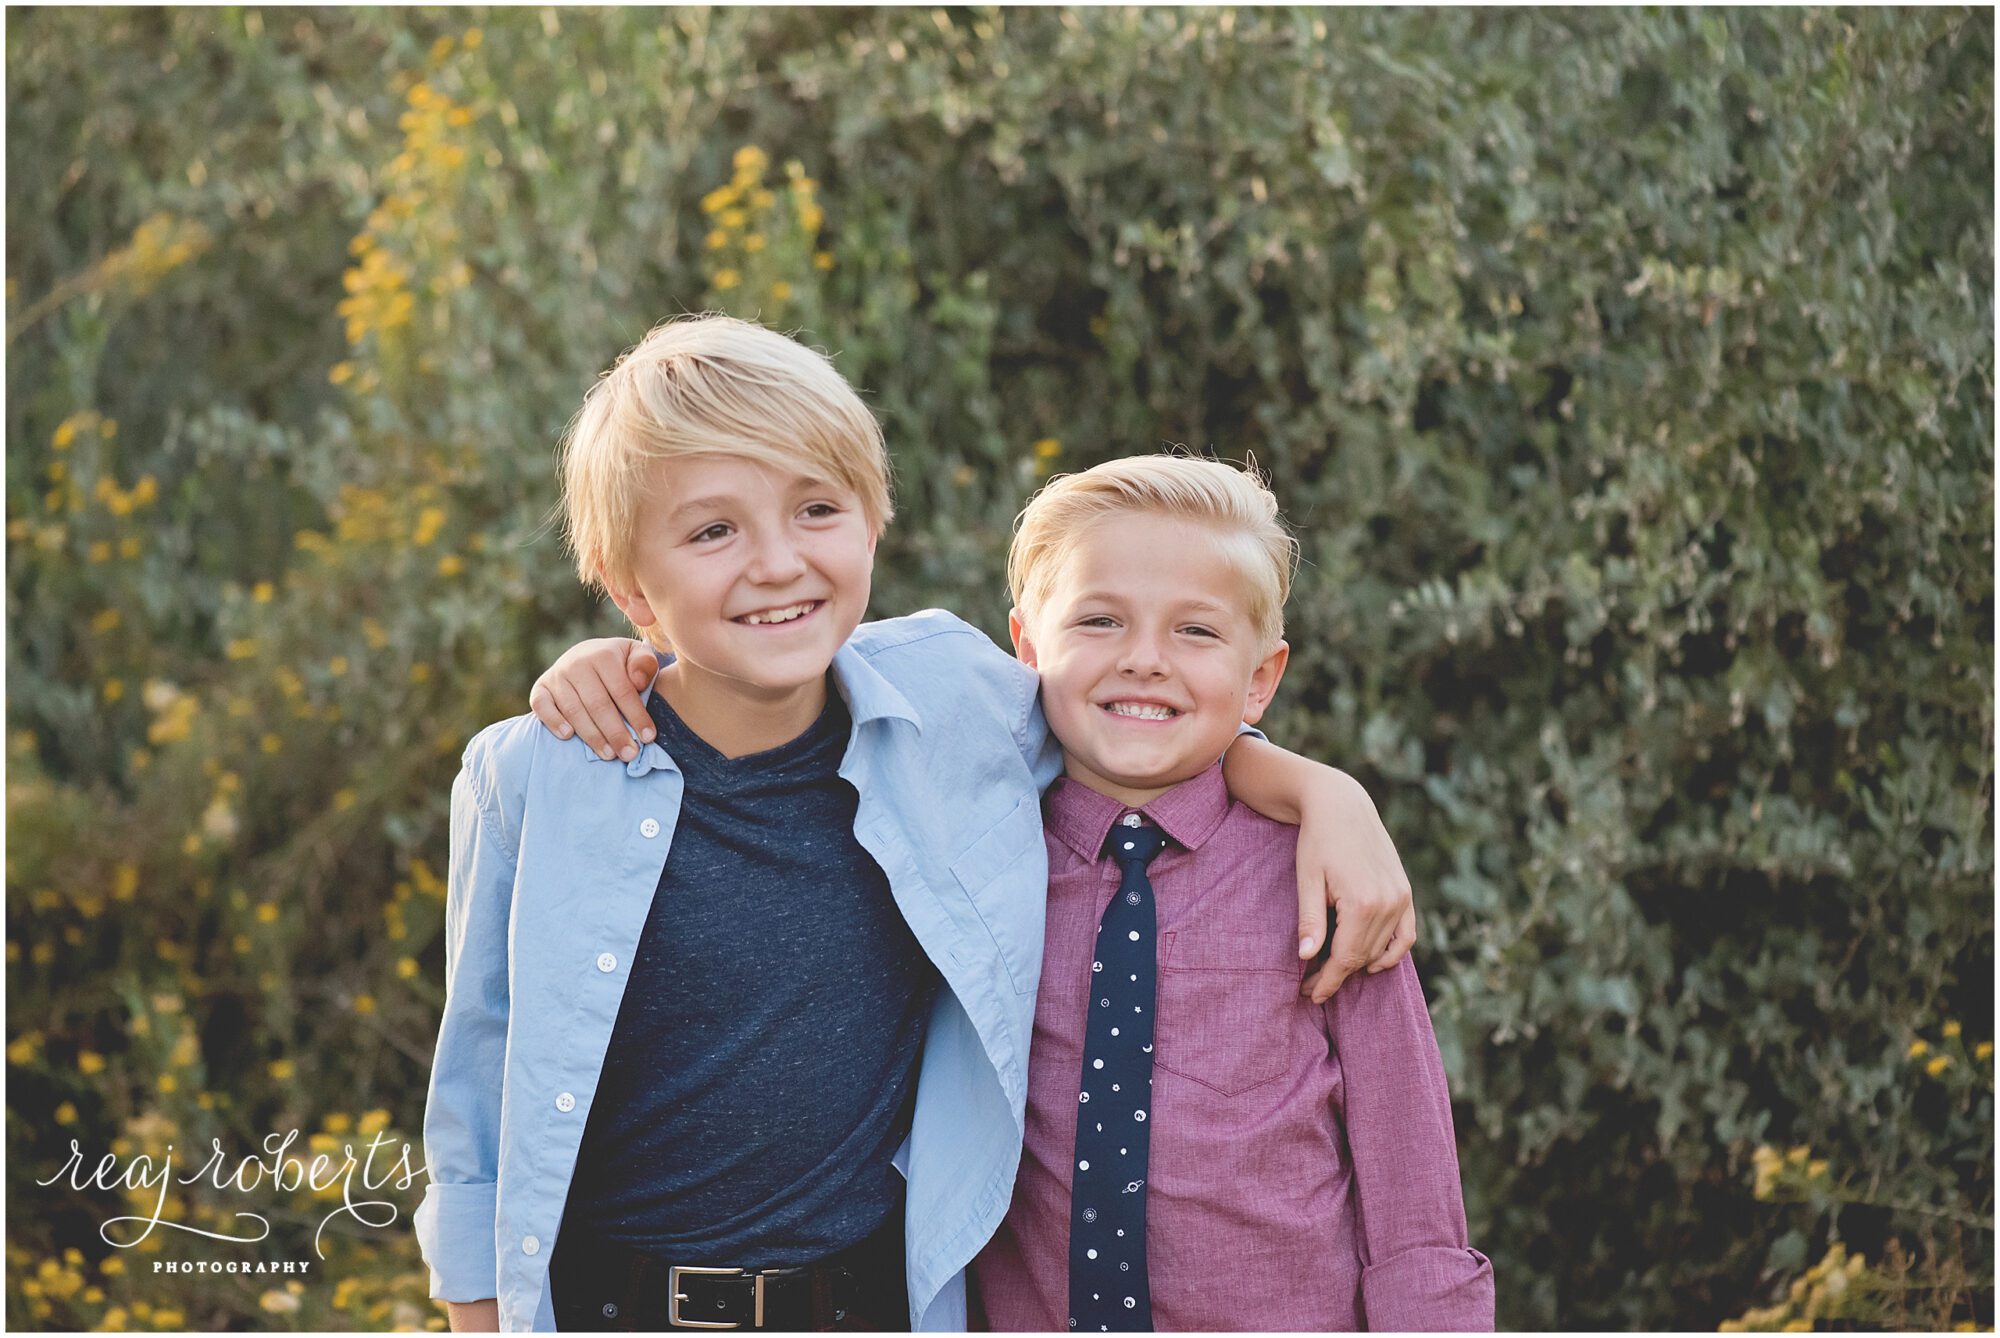 Brother photo poses | Reaj Roberts Photography